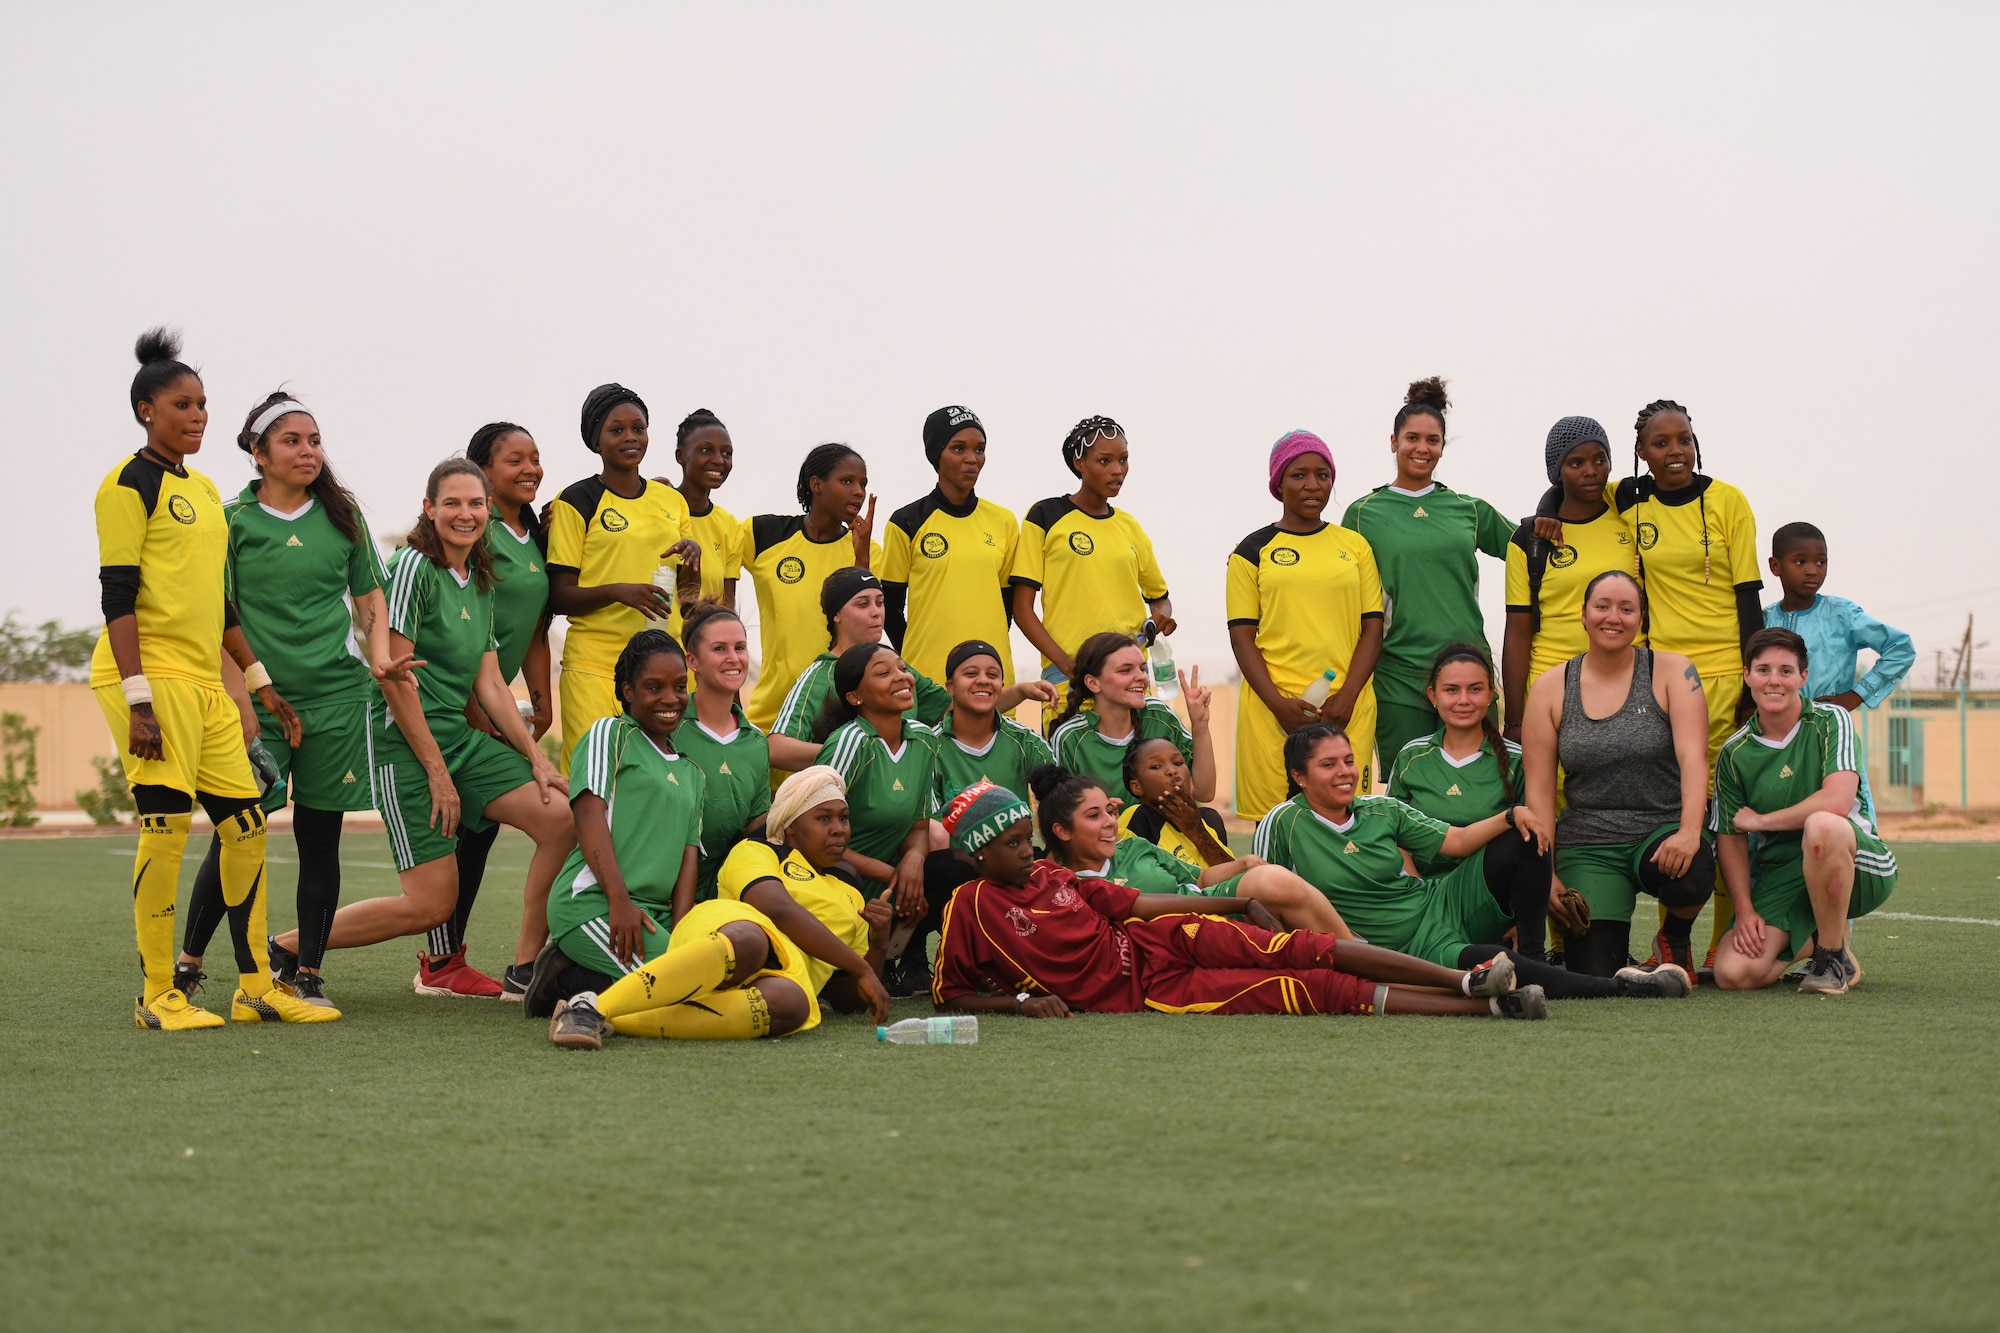 U.S. Air Force women deployed to Nigerien Air Base 201 and the Nassara Athletic Club Women’s Soccer Team pose for a photo after a community outreach game at the Agadez Sports Stadium in Agadez, Niger, July 5, 2019. The civil affairs team organized the event that also included the donation of soccer balls to the women’s team and youth development team. (U.S. Air Force photo by Senior Airman Lexie West)